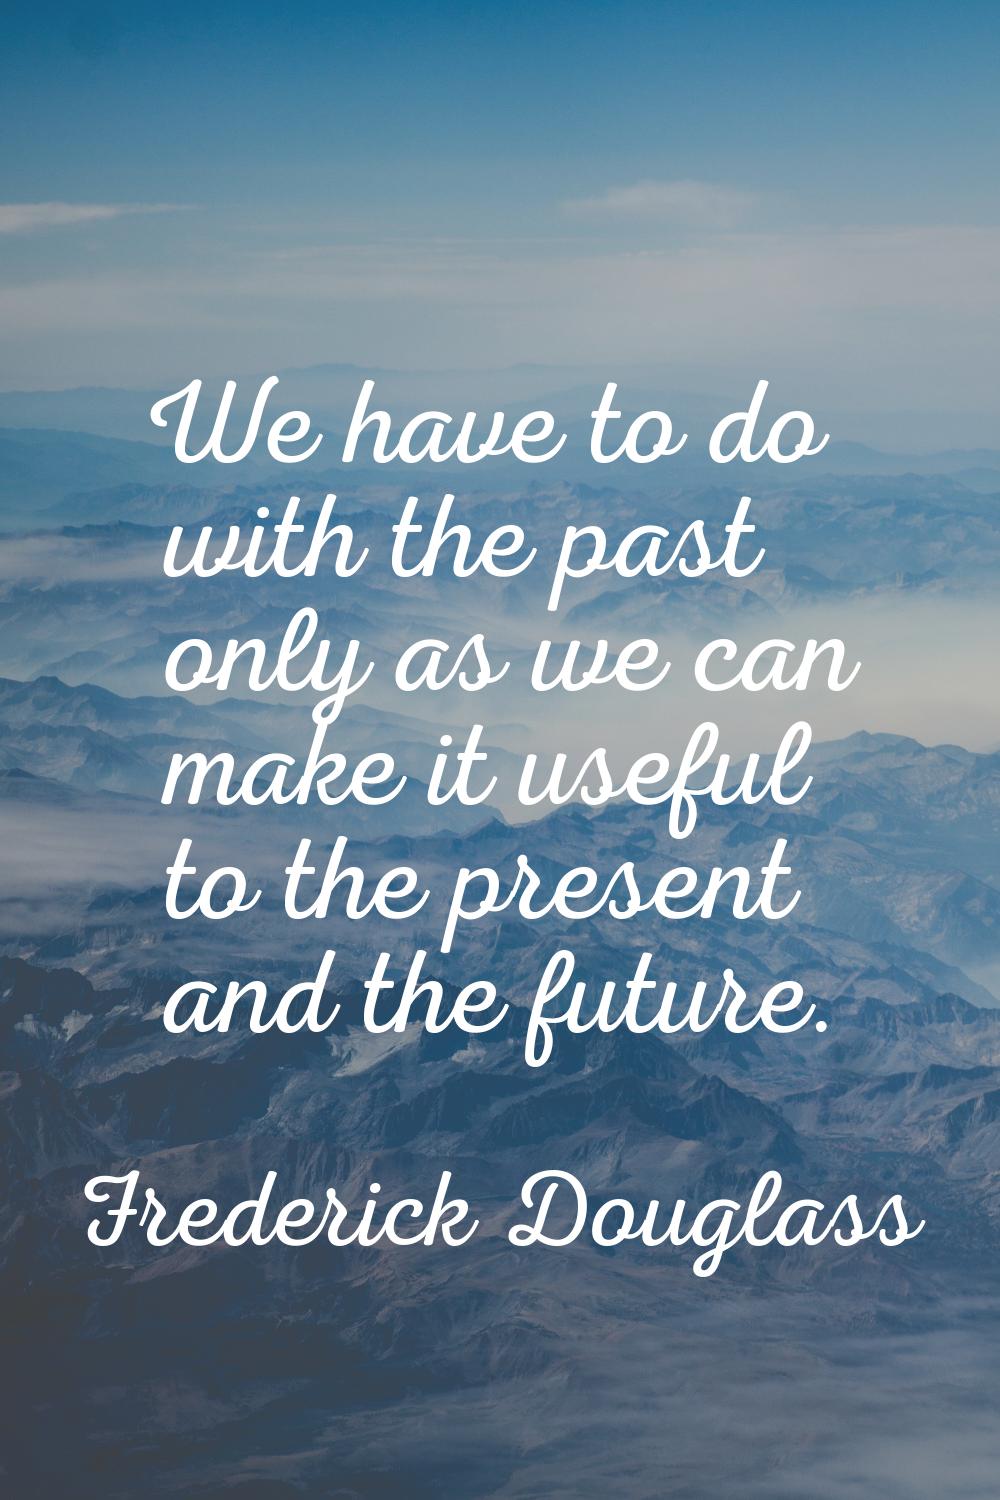 We have to do with the past only as we can make it useful to the present and the future.